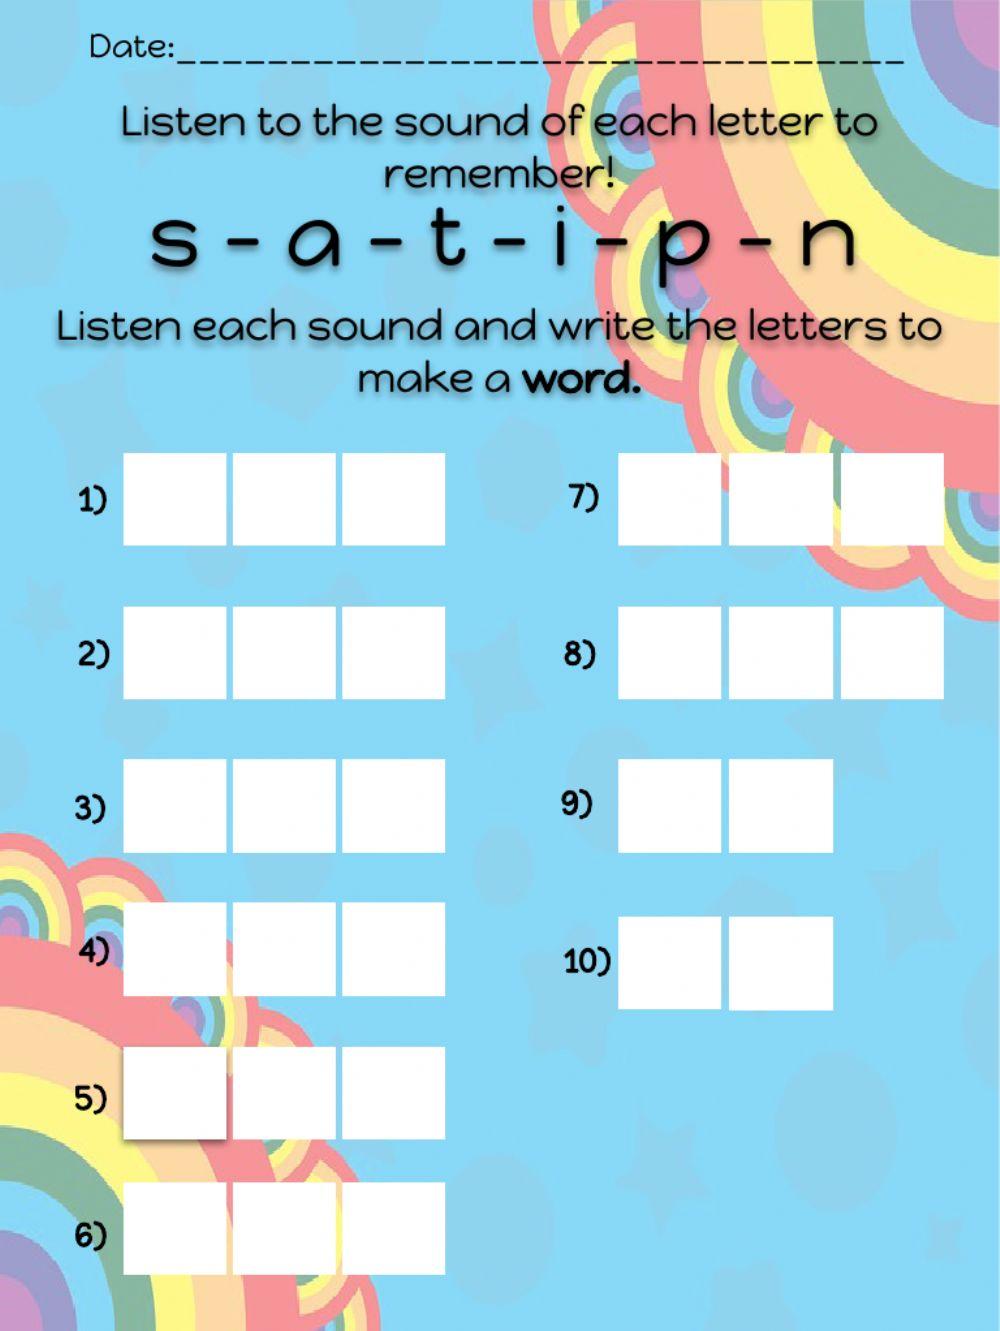 SOUNDS SET 1 - listen and write